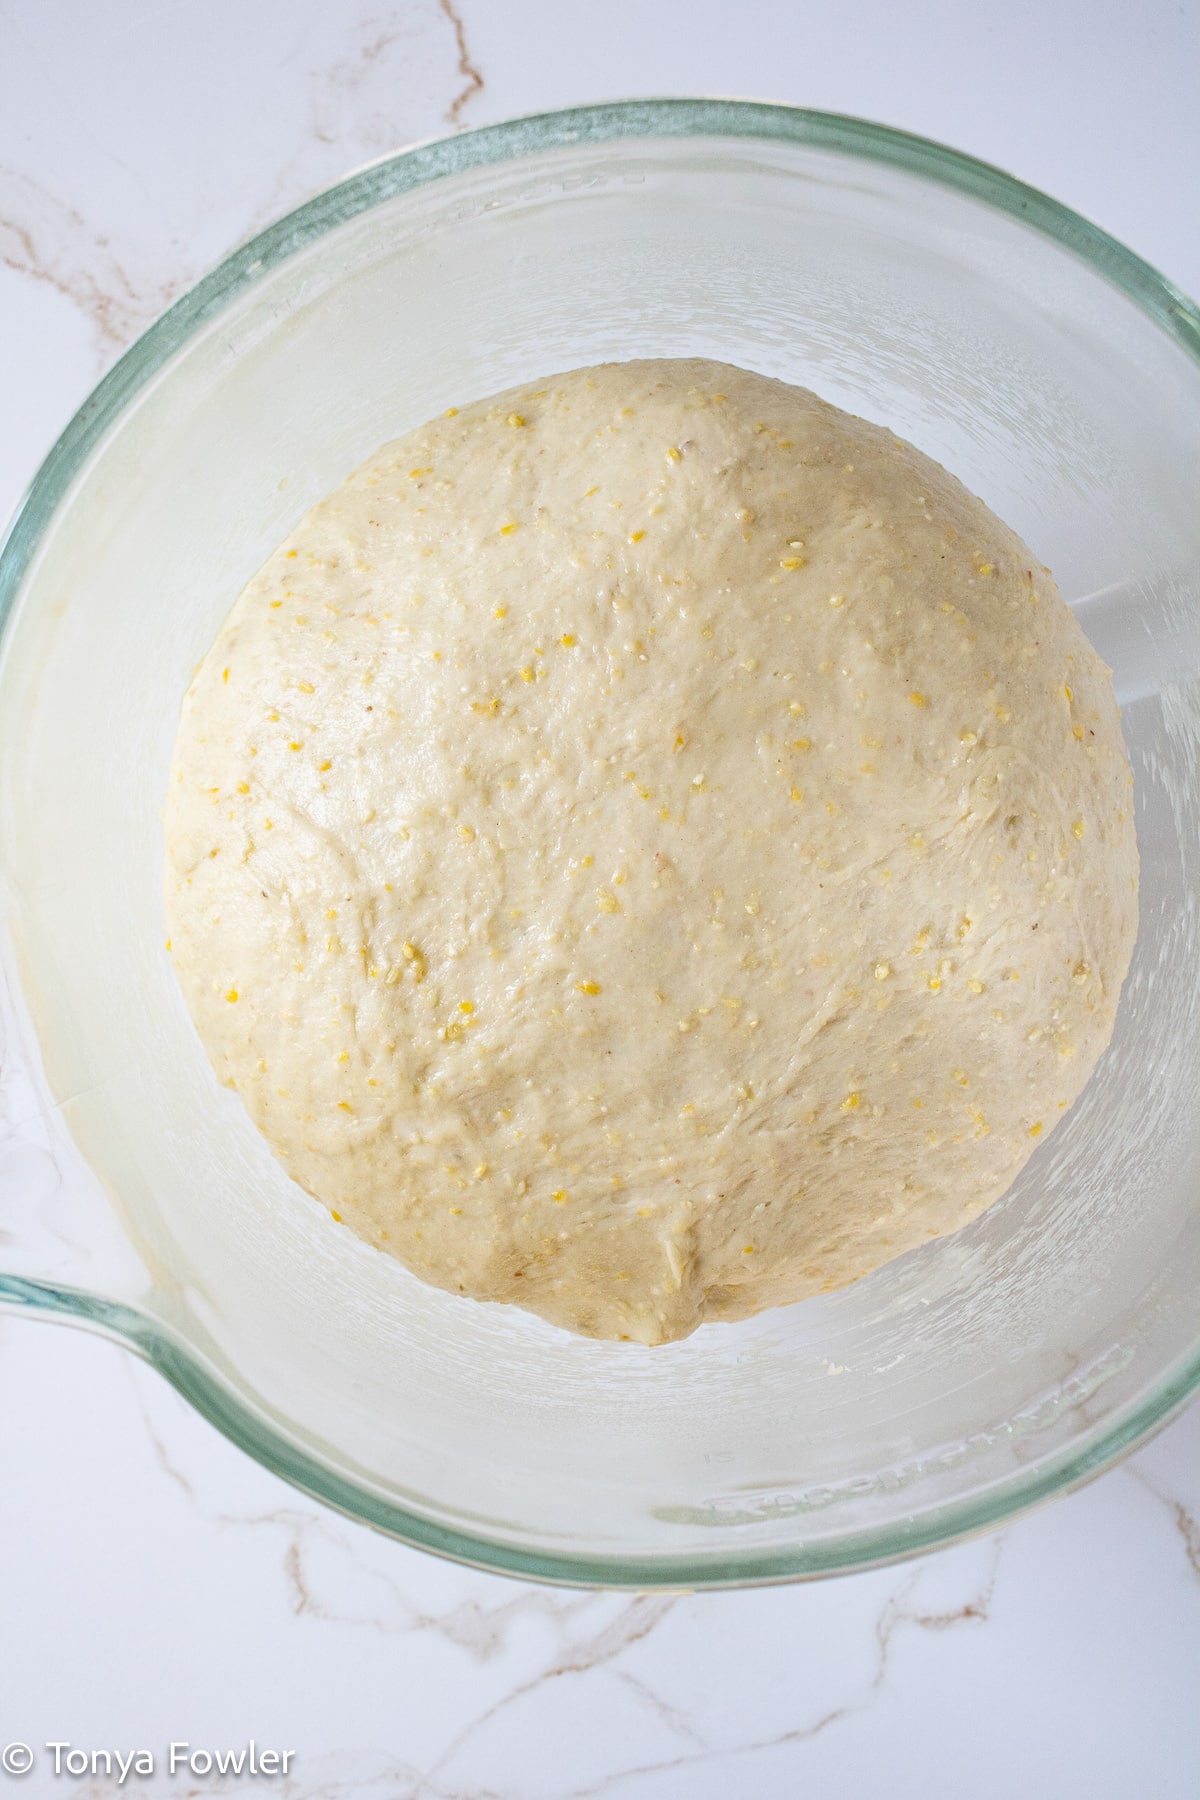 Pizza dough that has doubled in size in a mixing bowl.